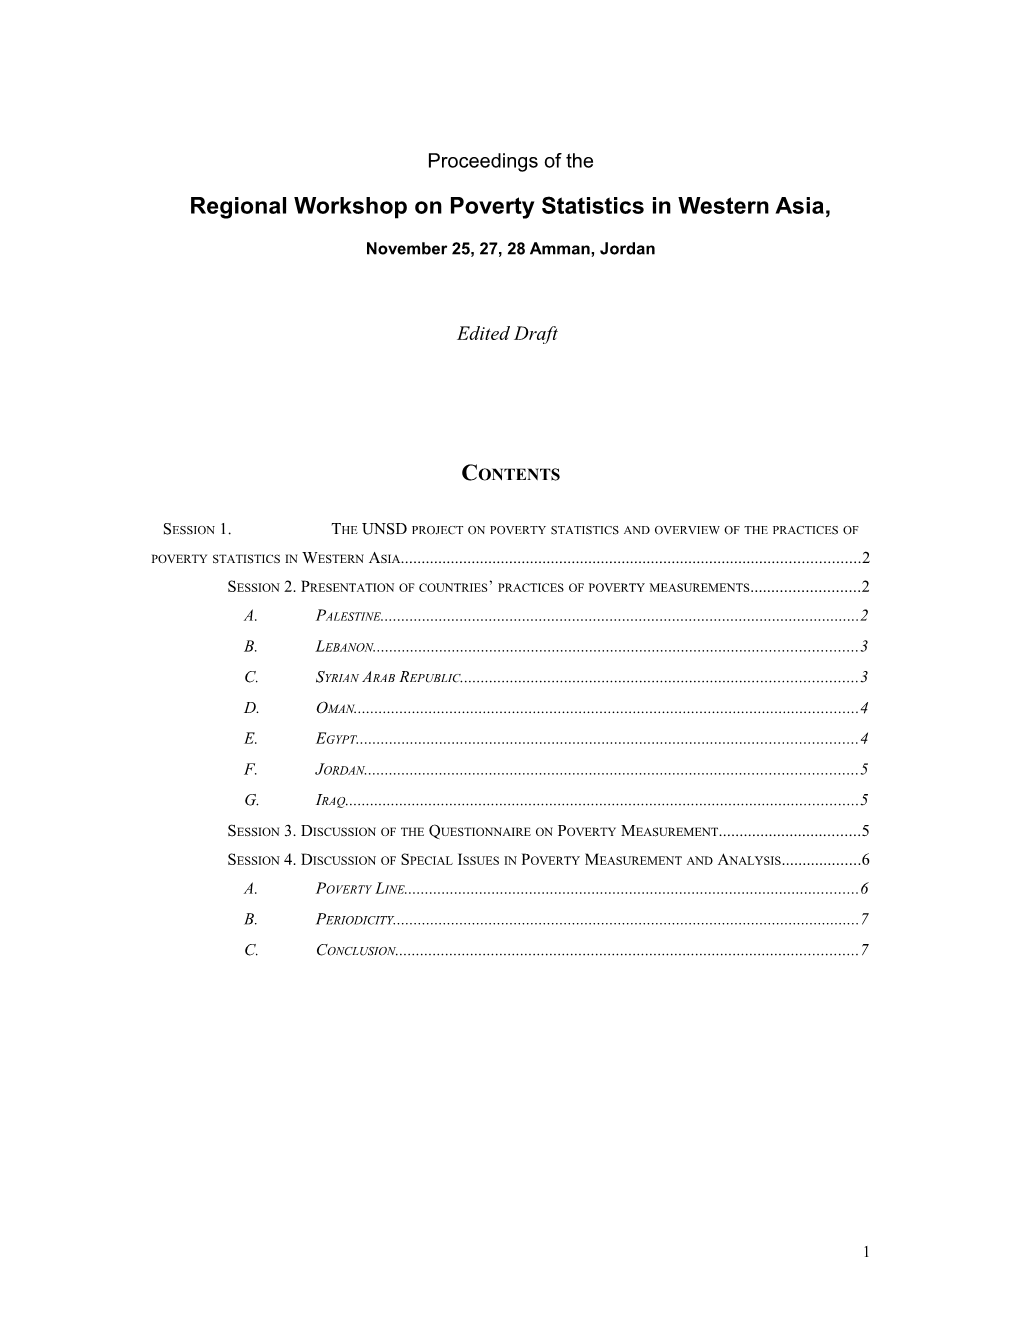 Recommendations Resulting from the Workshop on Poverty Statistics in Amman, Jordan